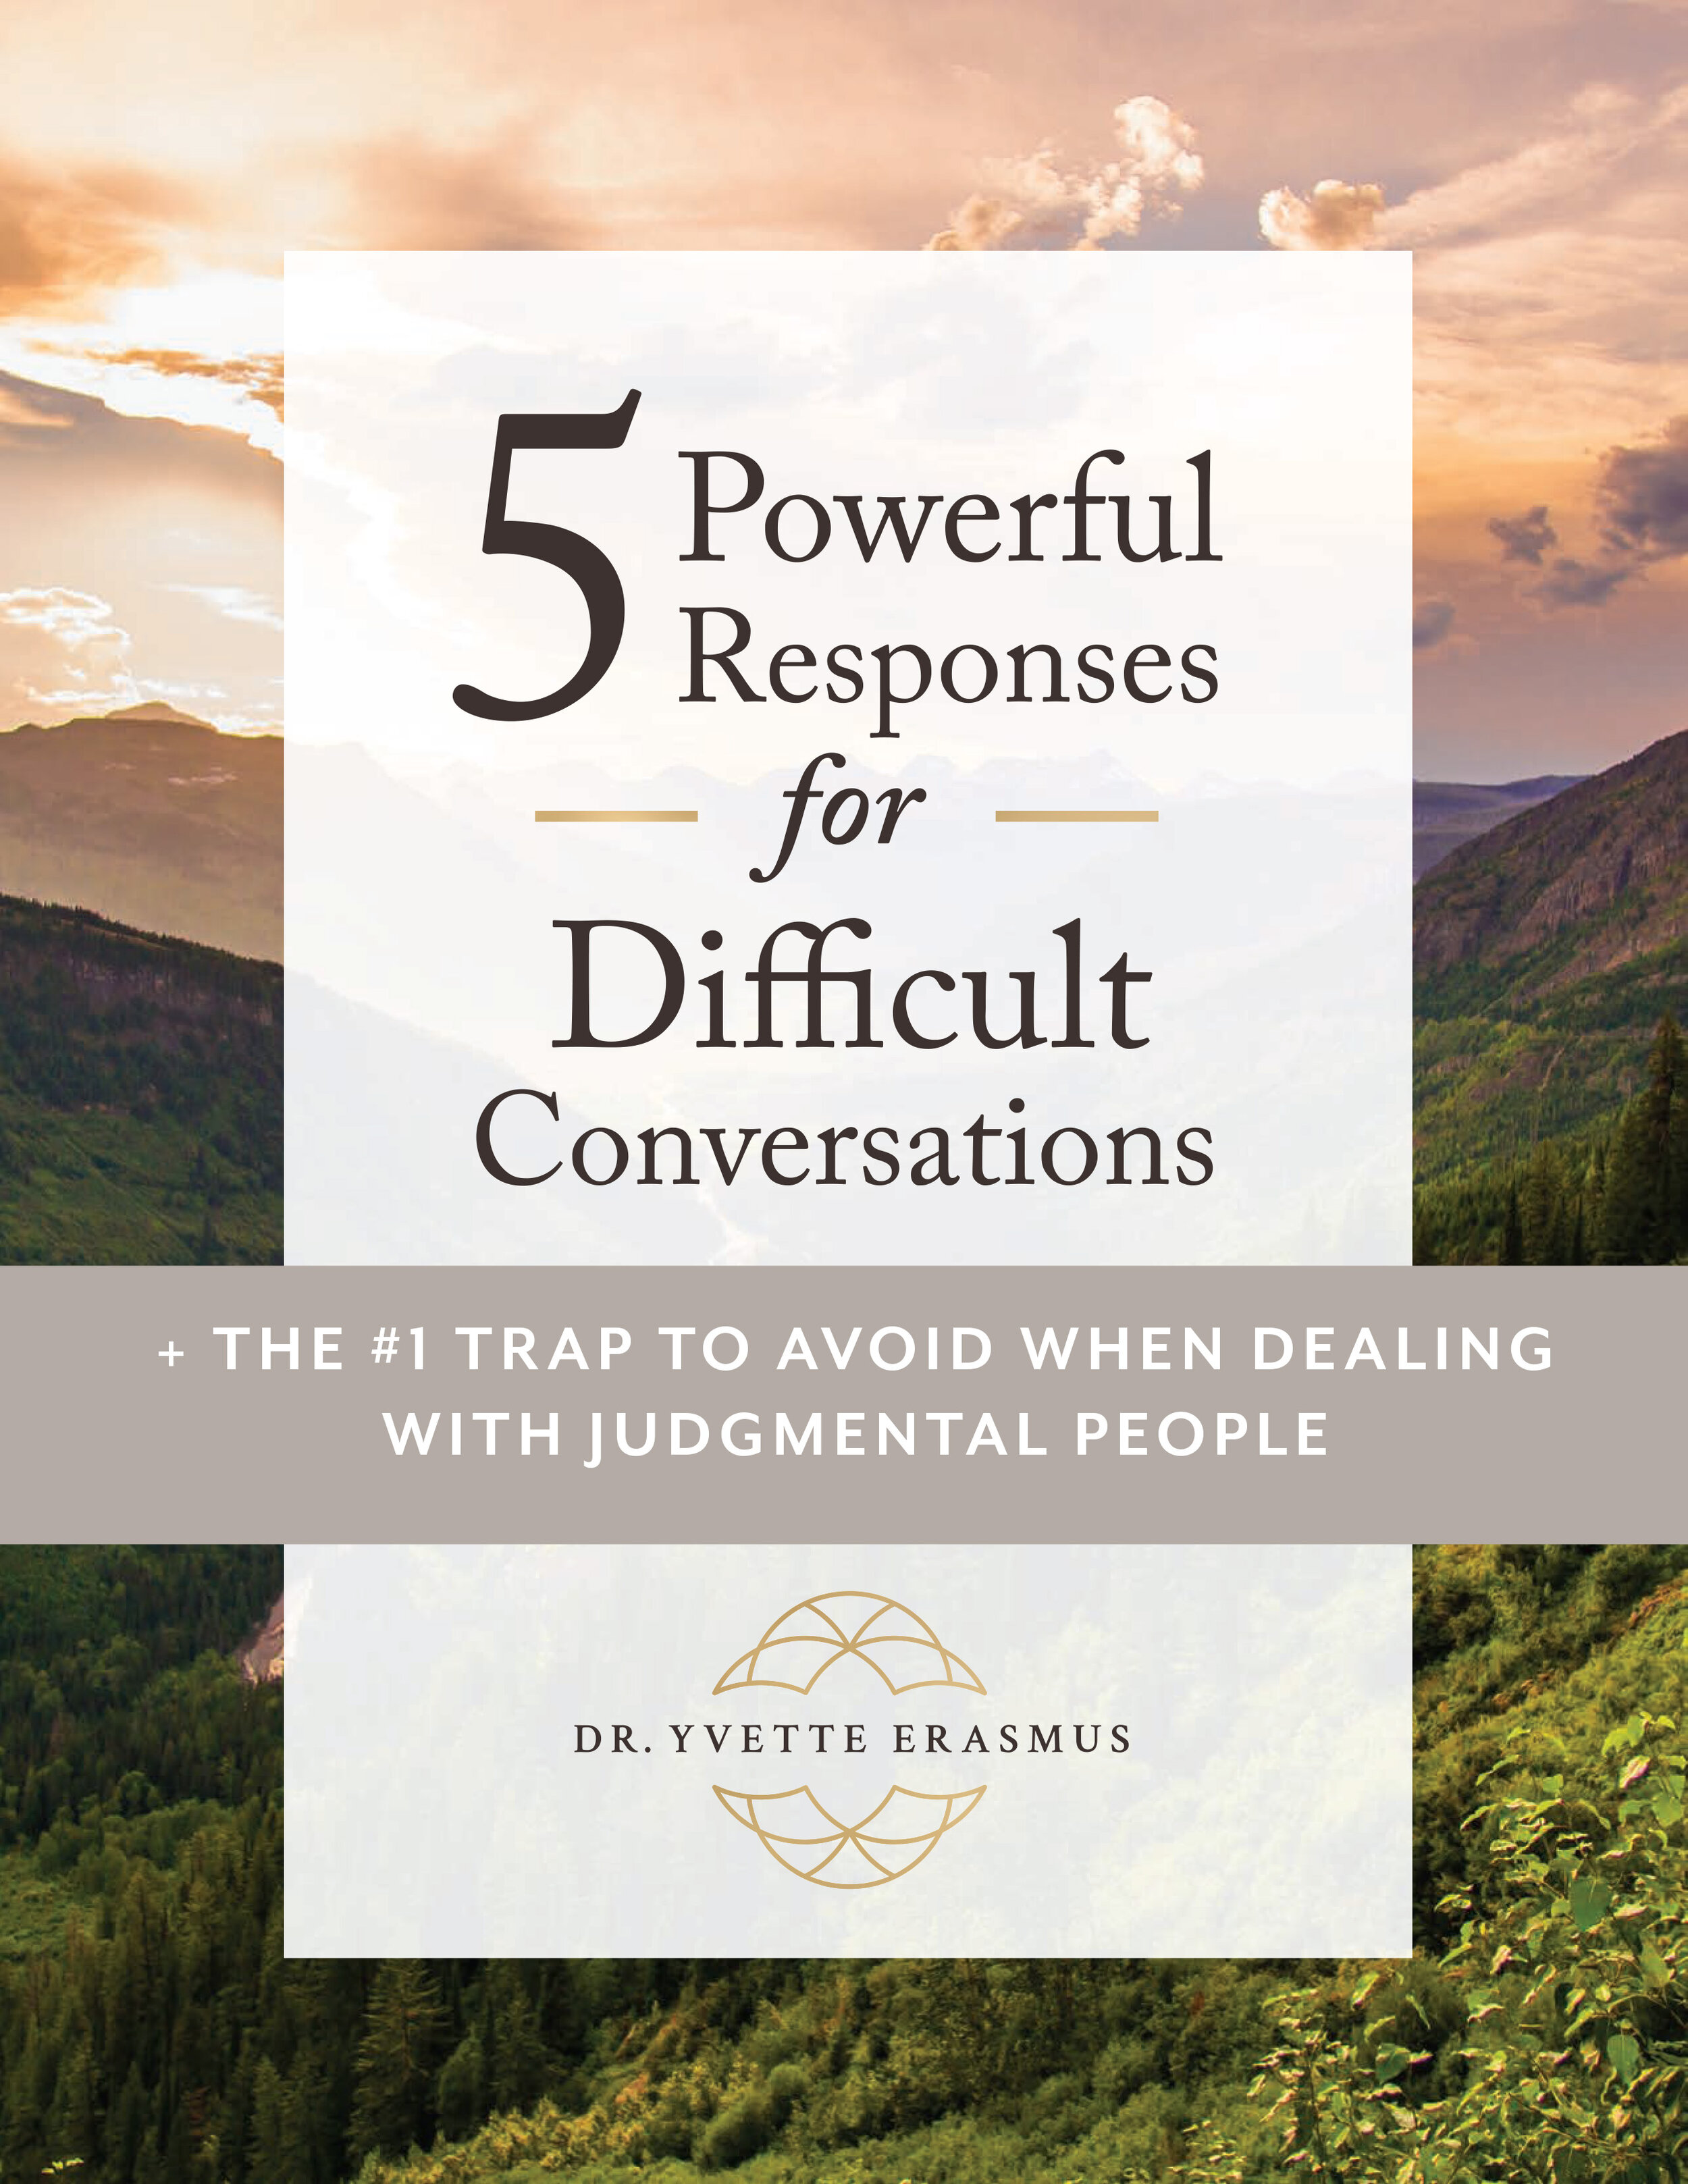 5 Powerful Responses for Difficult Conversations